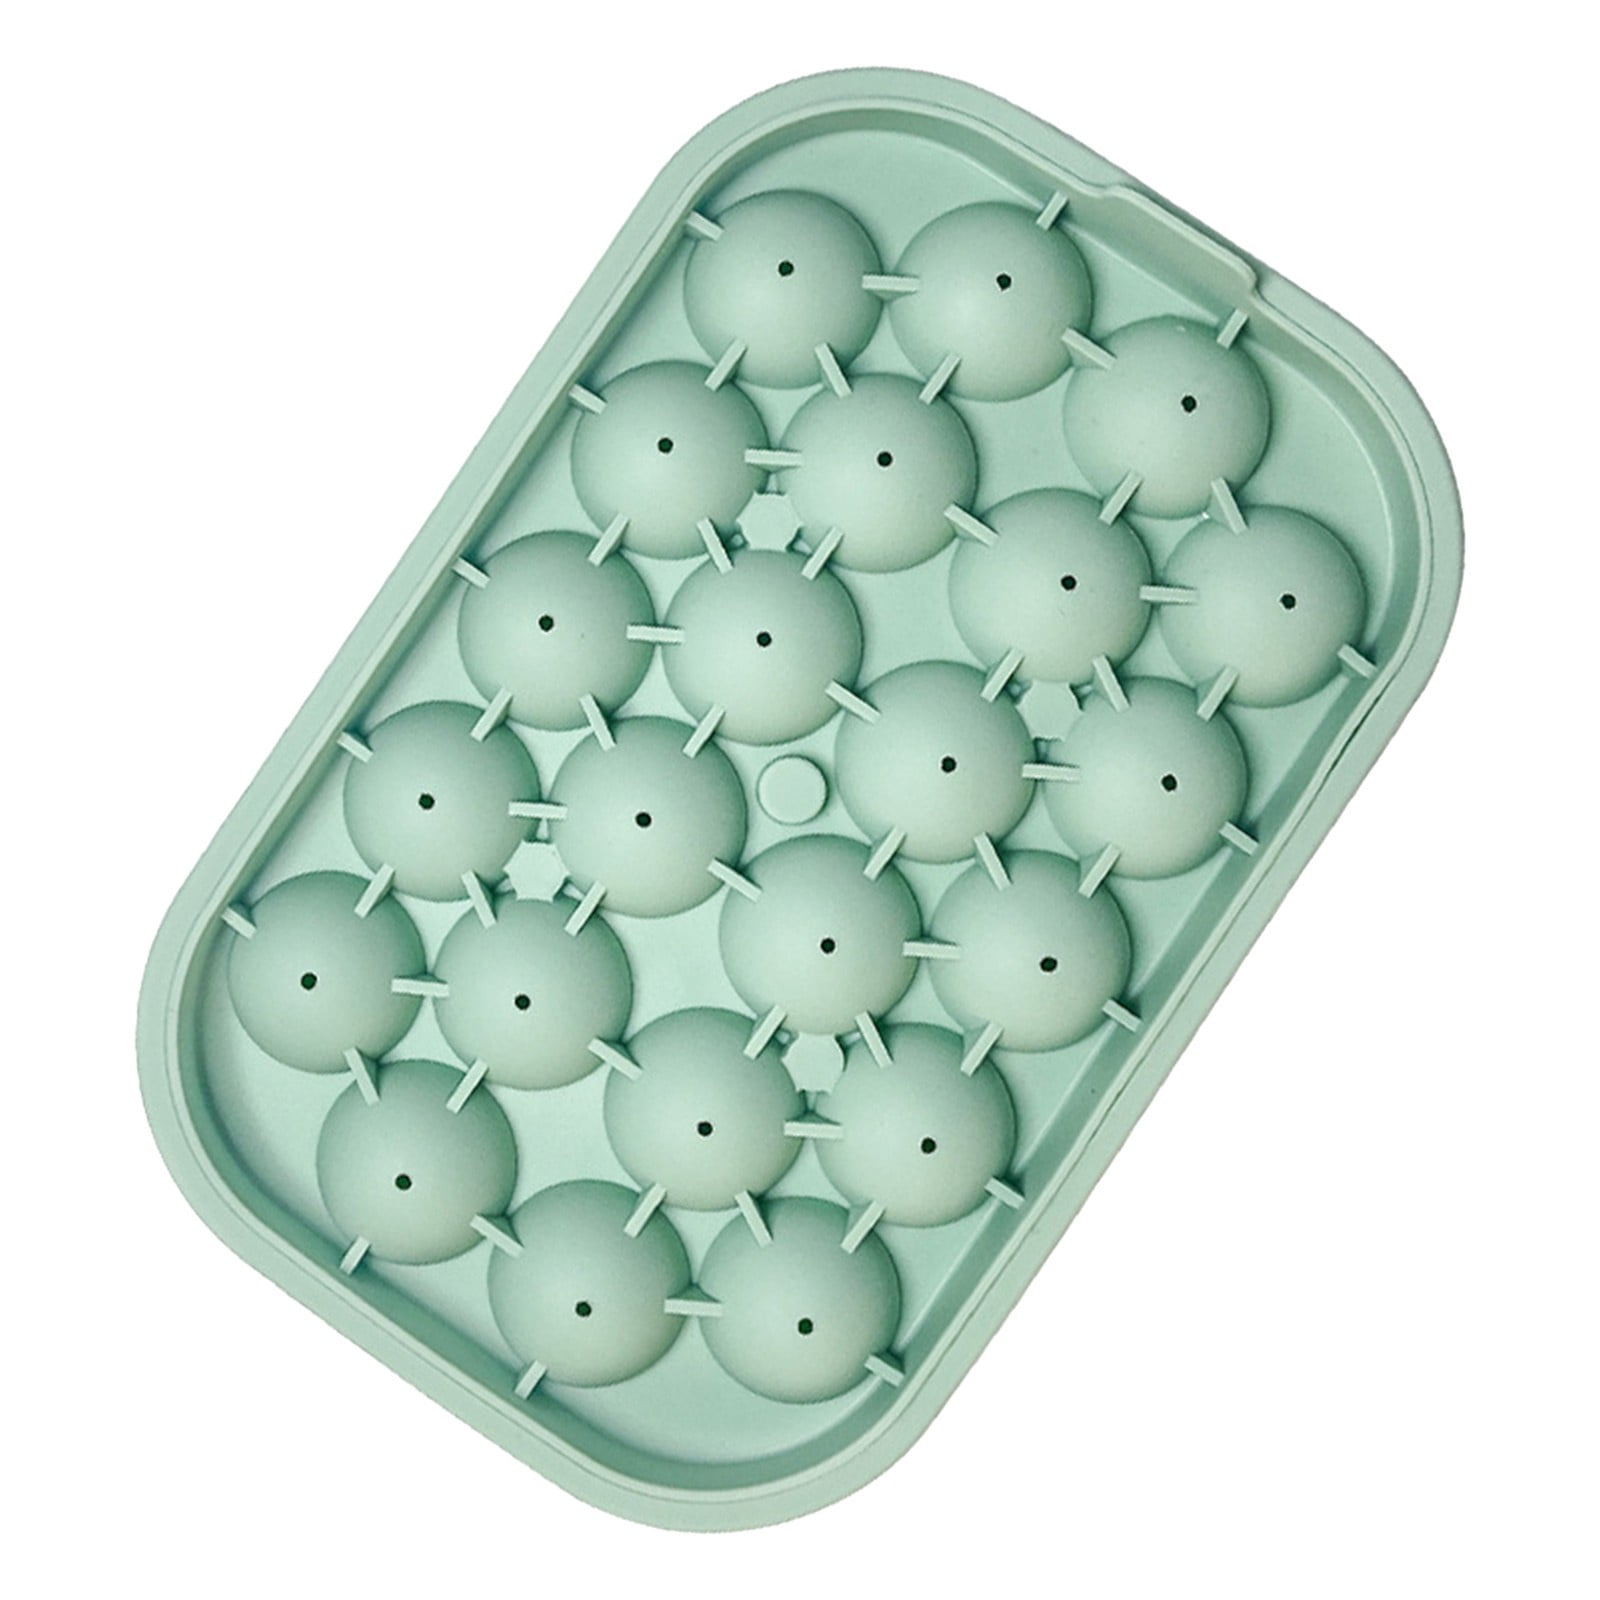 Loyerfyivos Ice Cube Tray, Round Ice Trays for Freezer,Circle Ice Cube Molds Making 1.0 inch Small Ice Balls,Sphere Ice Makers for Cocktail Whiskey